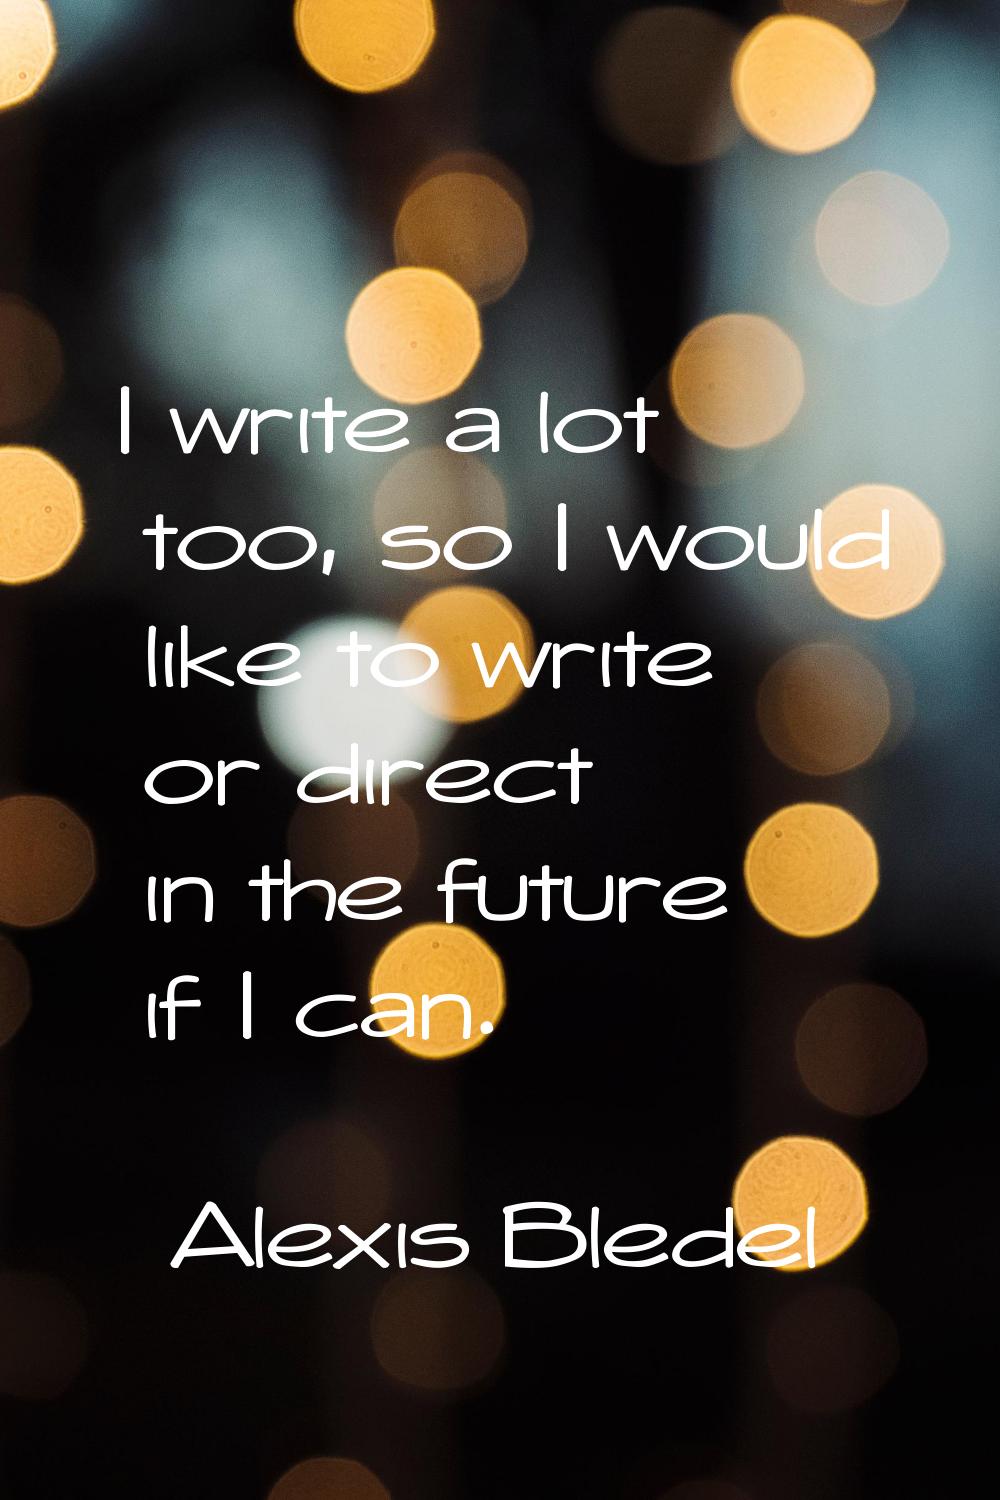 I write a lot too, so I would like to write or direct in the future if I can.